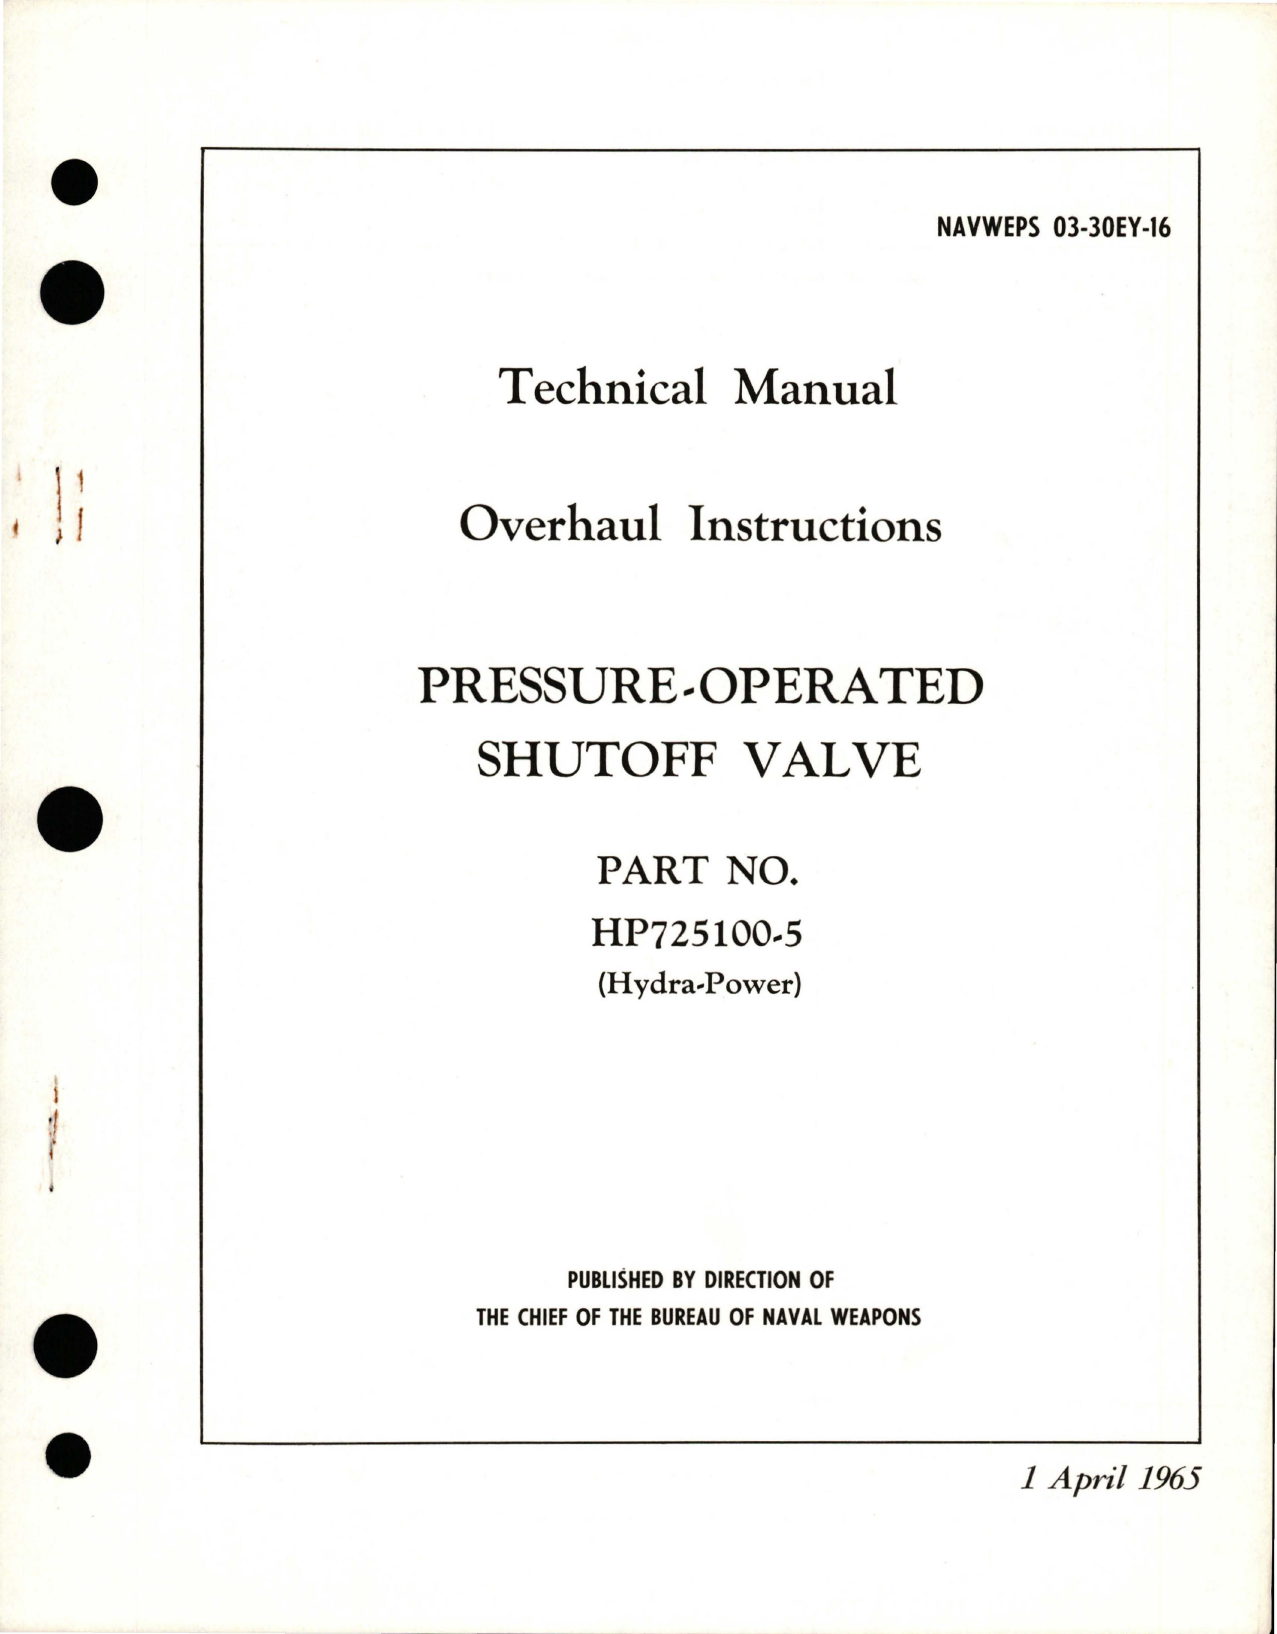 Sample page 1 from AirCorps Library document: Overhaul Instructions for Pressure Operated Shutoff Valve - Part HP725100-5